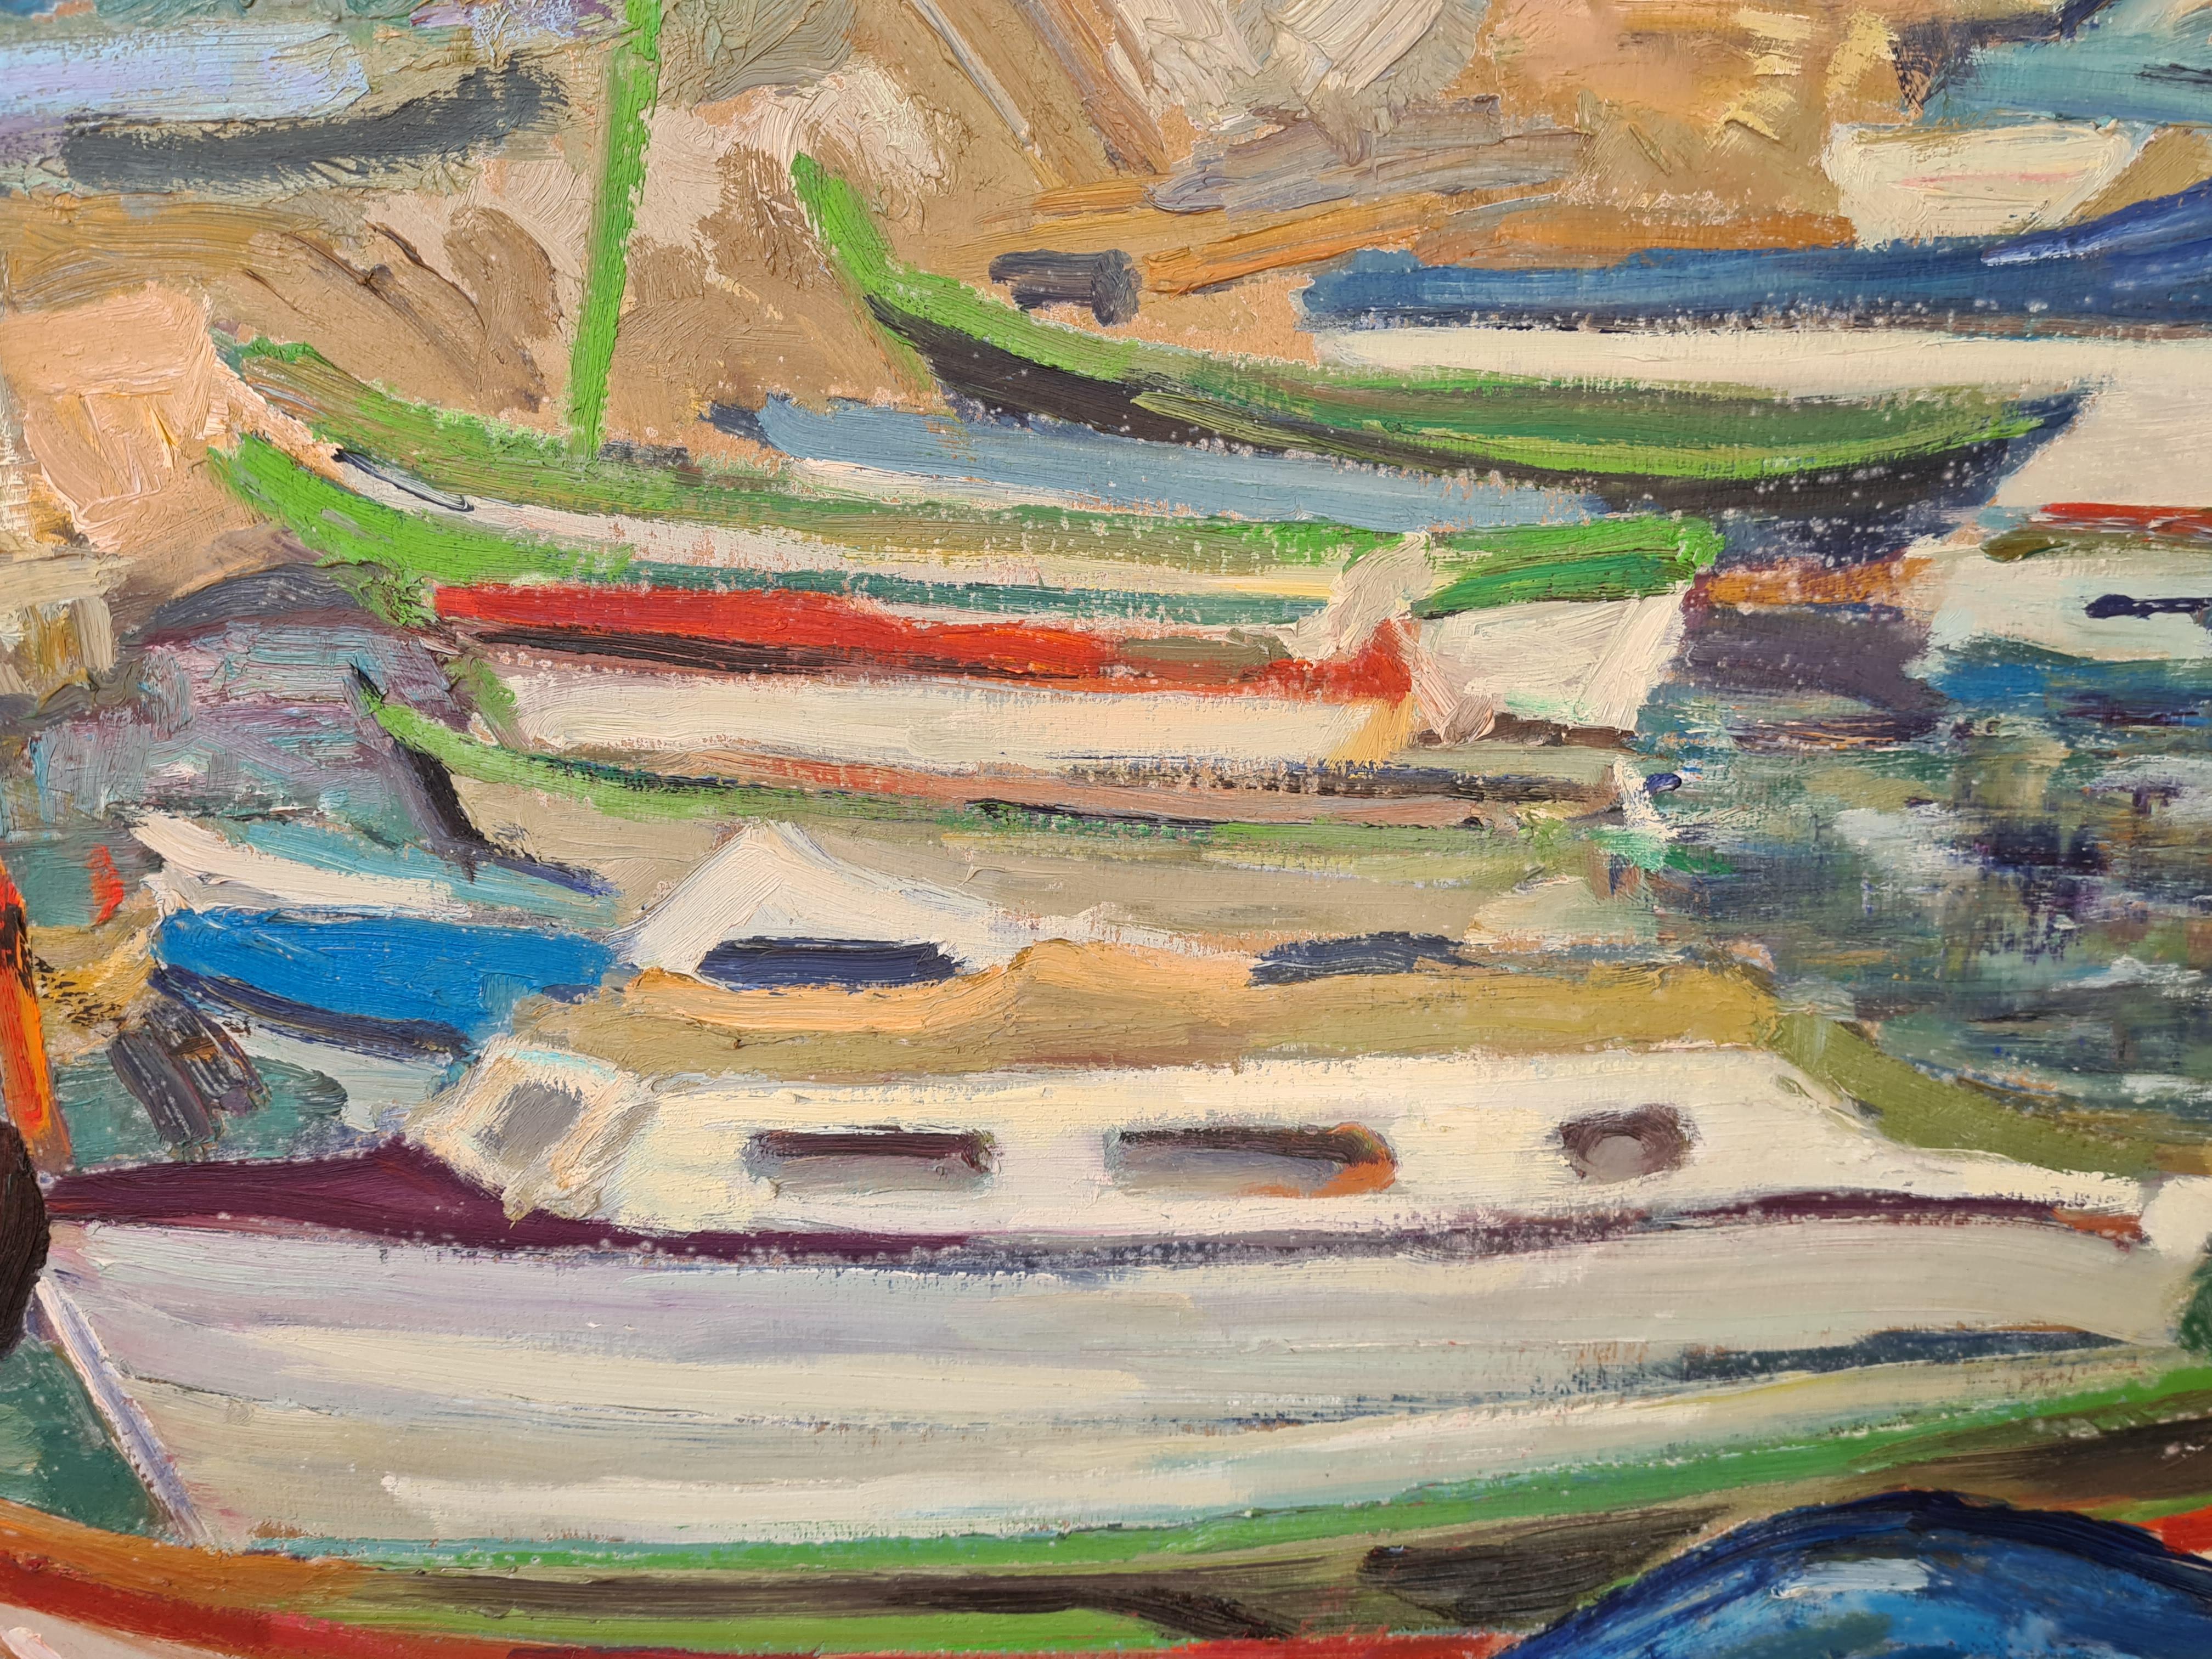 Le Port de l'Estaques, Large Fauvist View of Fishing Boats In A Port - Brown Landscape Painting by A Mariani